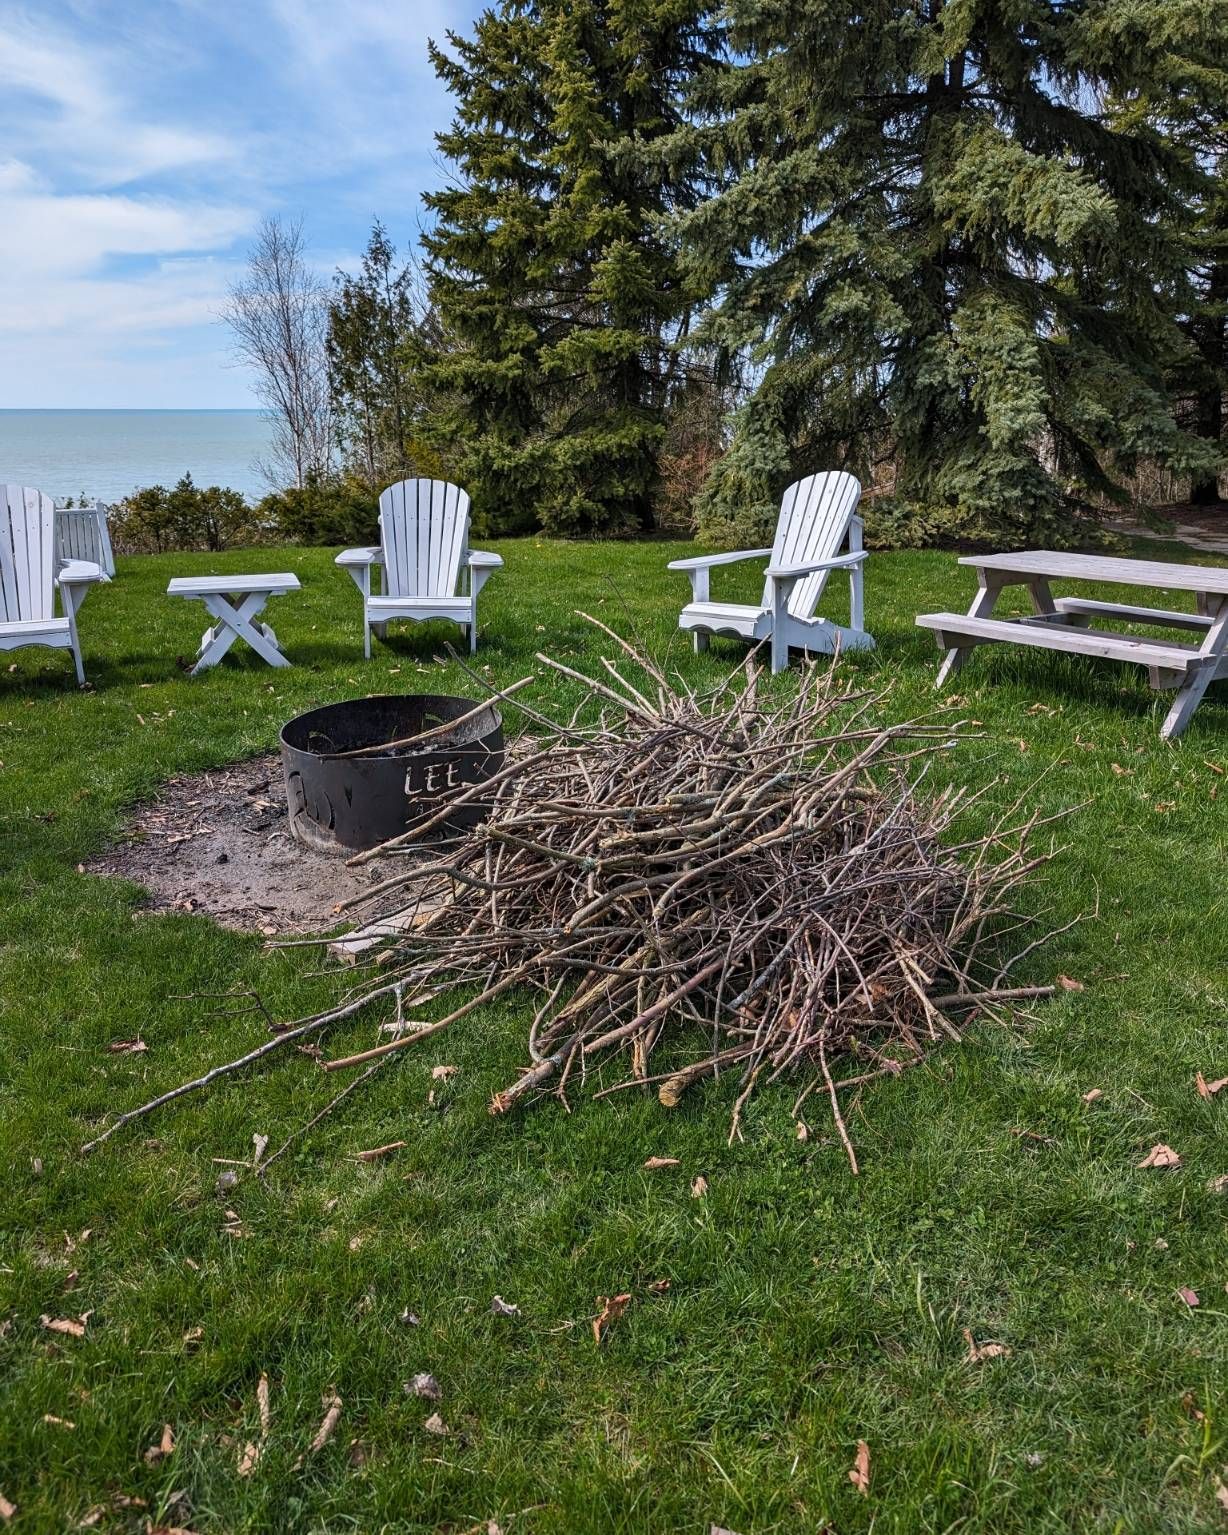 Instagram really needs to let you upload more then 10pics  at a time!  My arms feel like Jello today haha #yardwork #cleanup #rakingleaves #entrepreneur #bosslady #supportlocal #supportsmallbusiness #portofgoderich #surroundingareas #lakehome #lakehuron